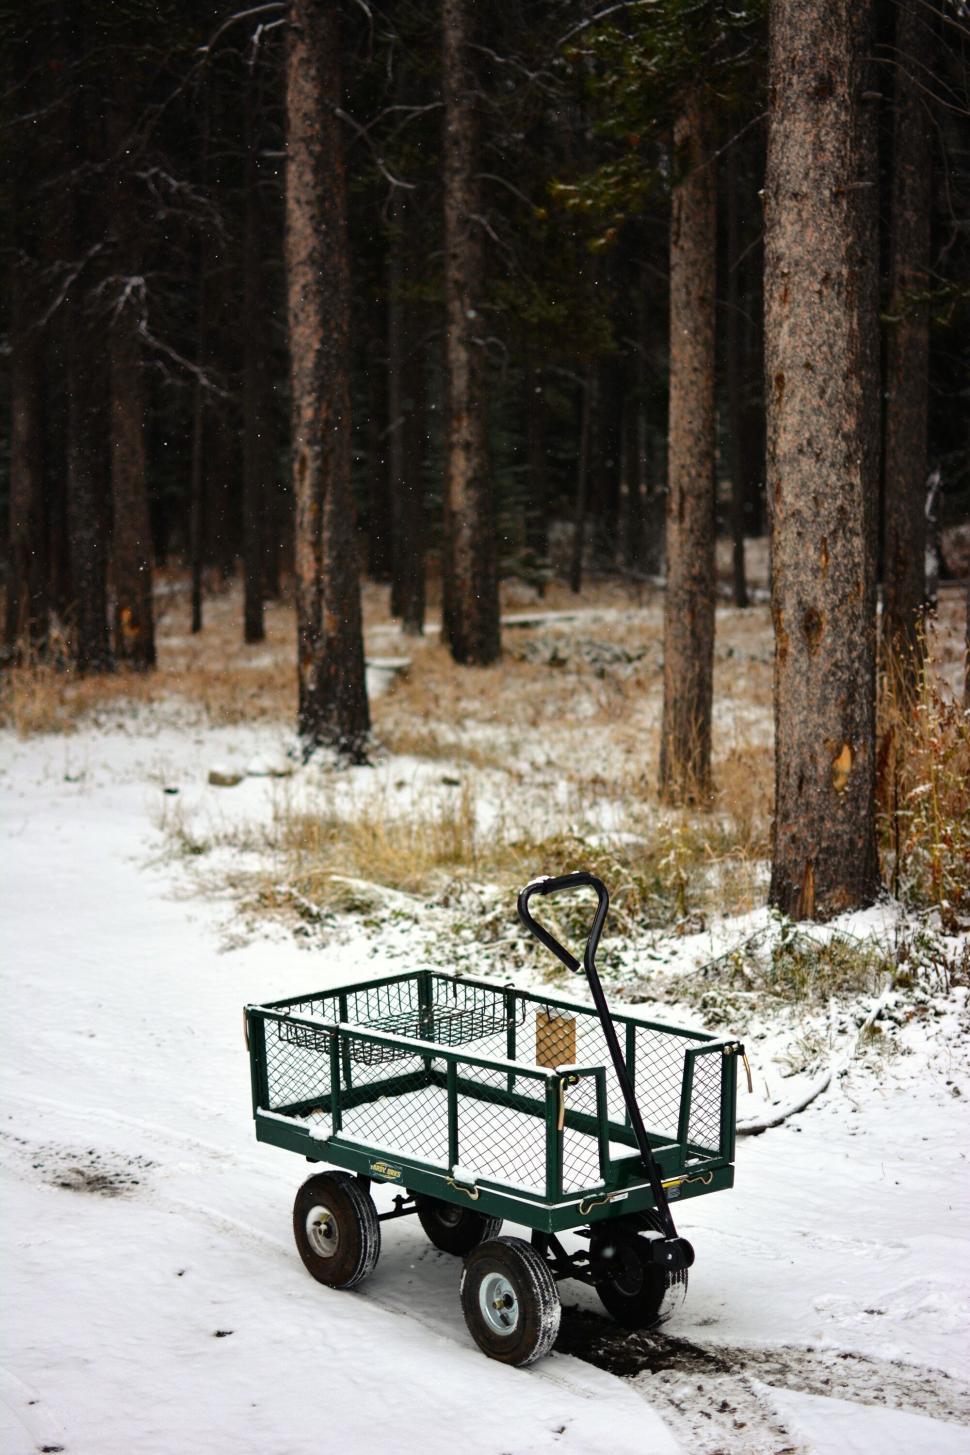 Free Image of Wagon Parked in Snowy Woods 